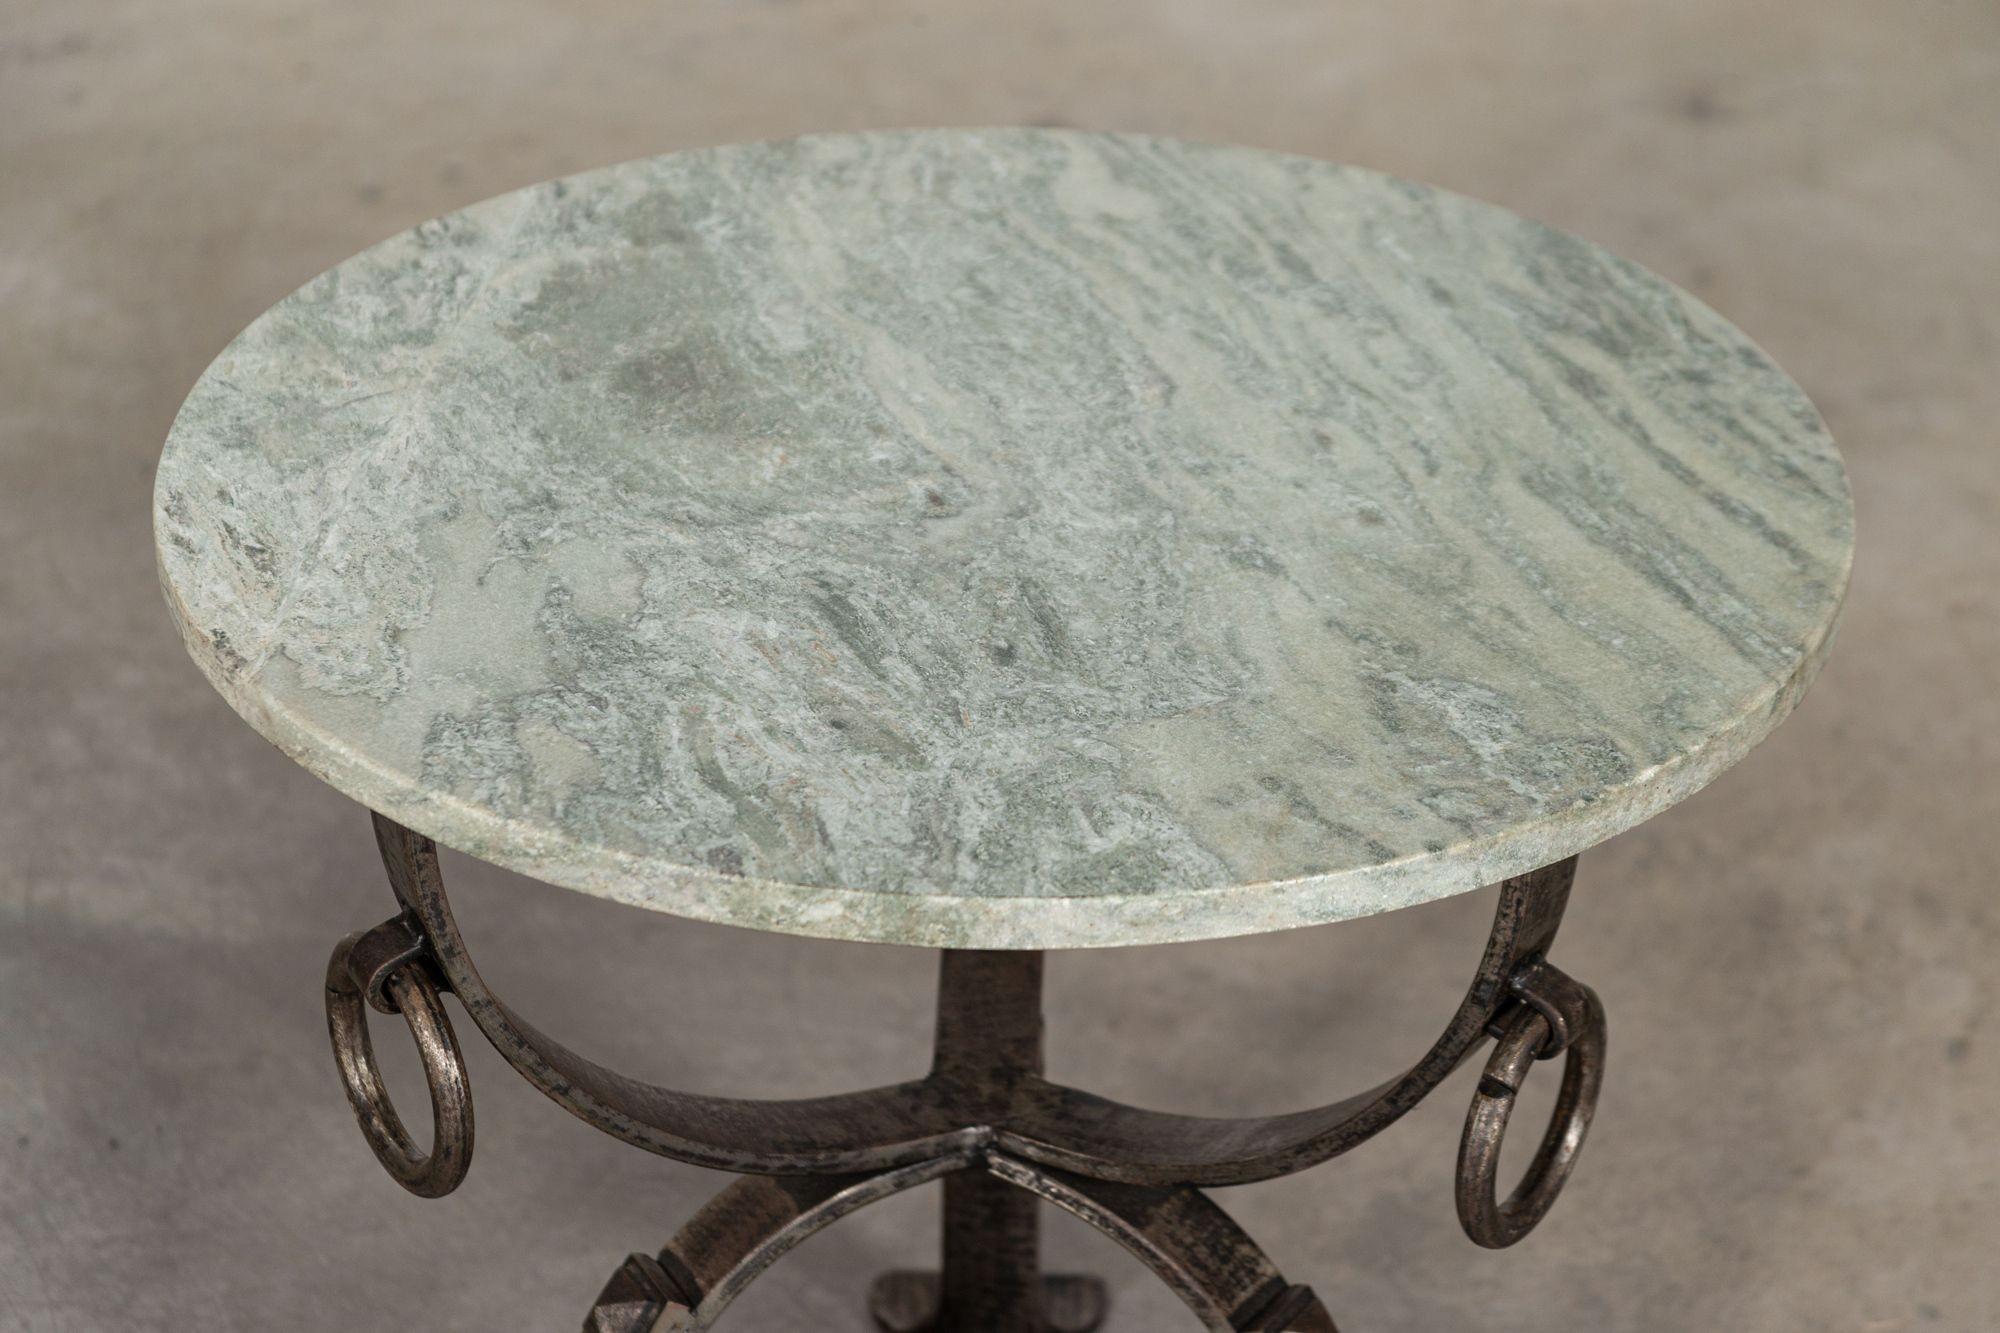 Midcentury French green marble and iron side table, circa Mid-20th Century
sku 1396
Measures: W 60 x D 60 x H 51 cm
Subject to VAT.
 